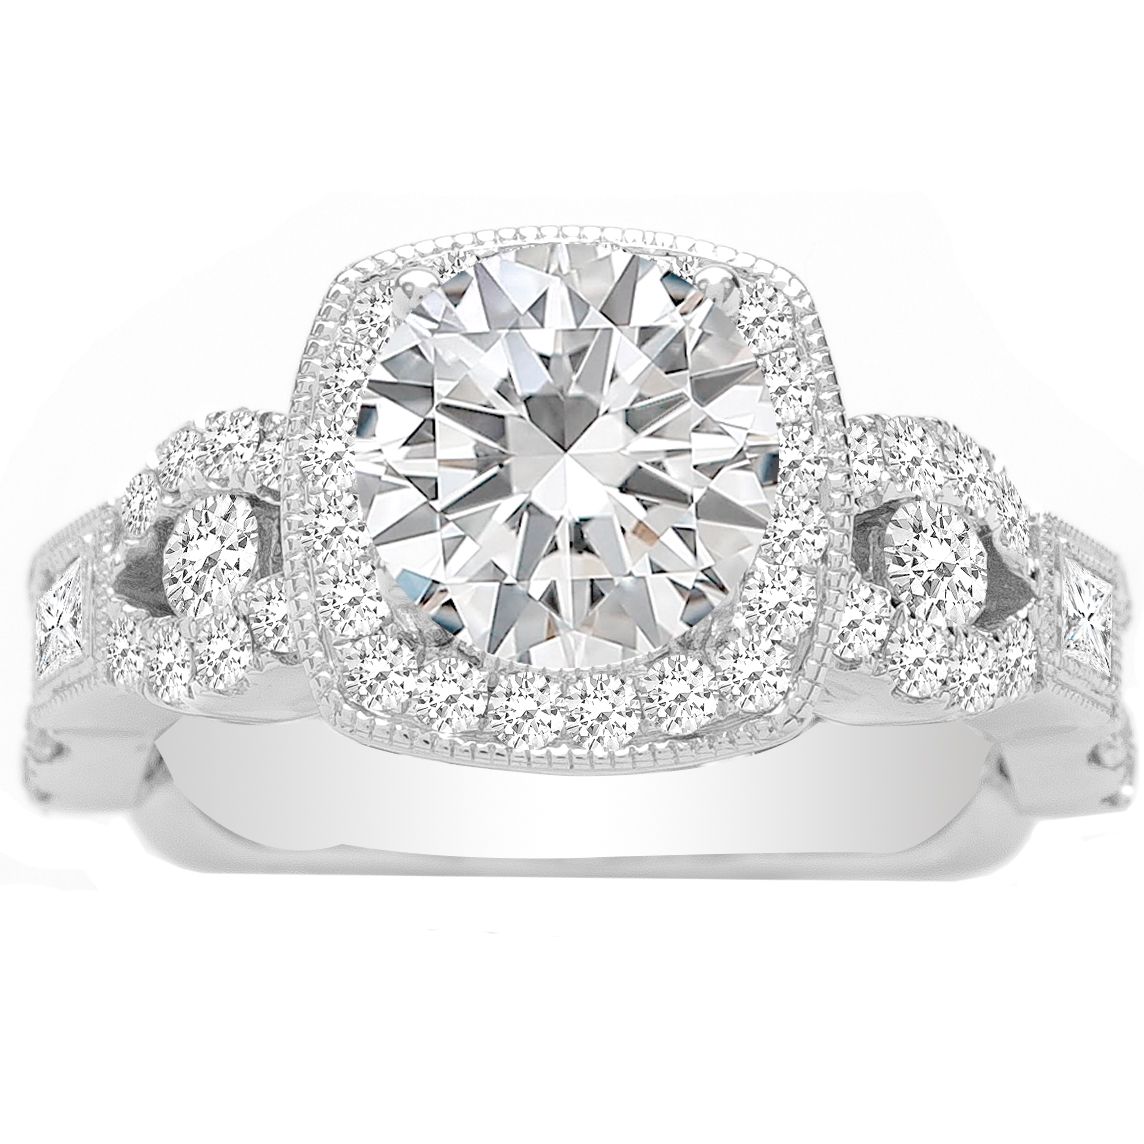 Quendalyn Engagement Ring Setting In 14K White Gold; 1.81 Ctw